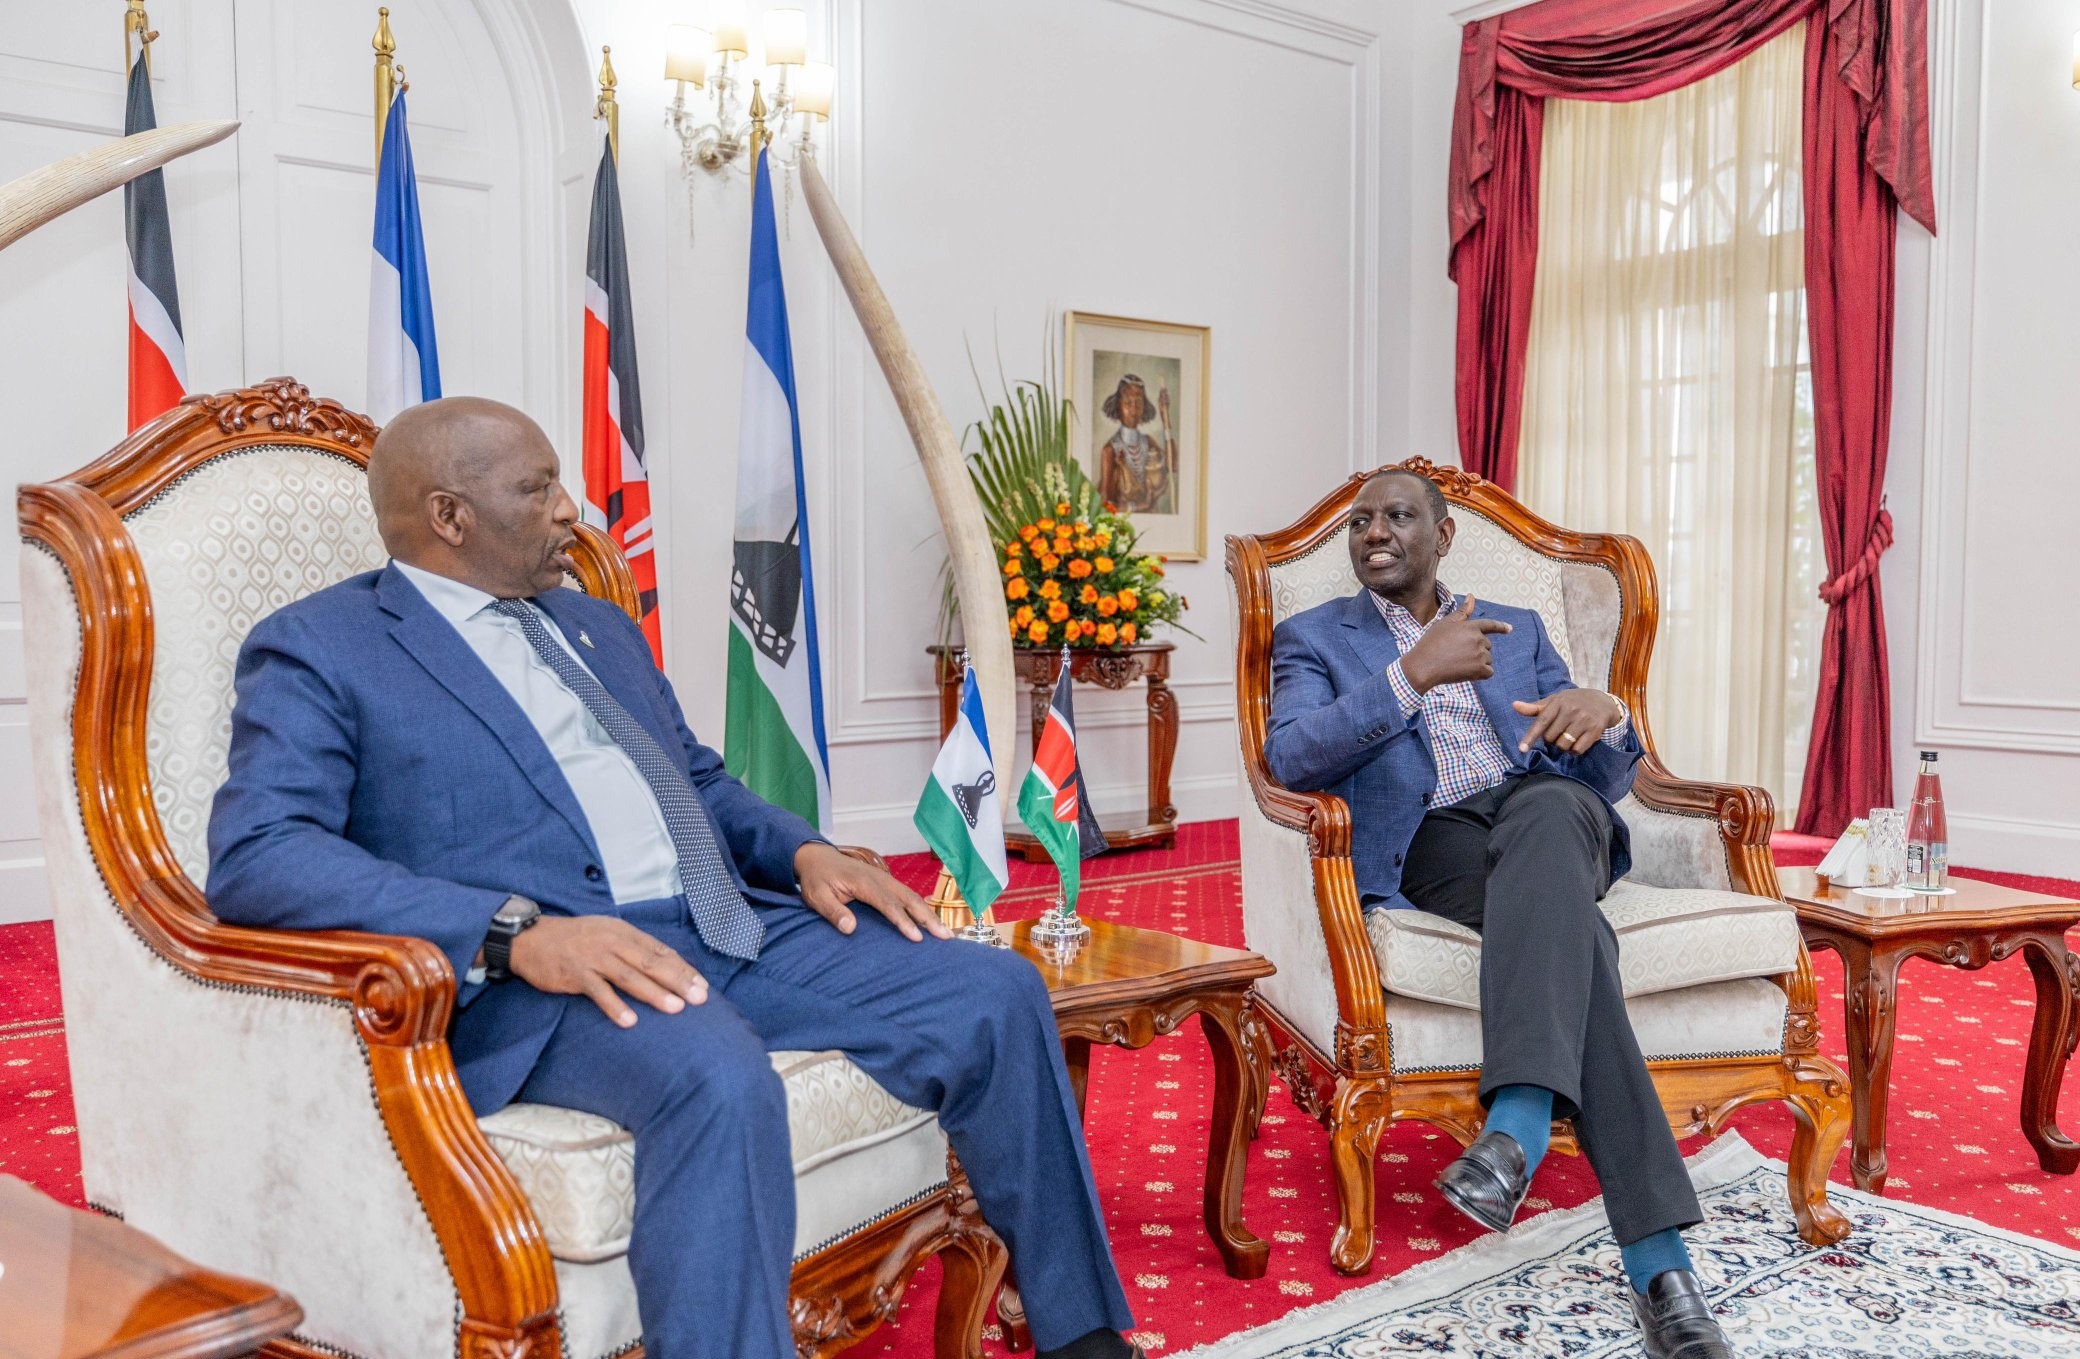 President Ruto and Lesotho PM Discuss Youth Empowerment and Bilateral Ties at State House Meeting